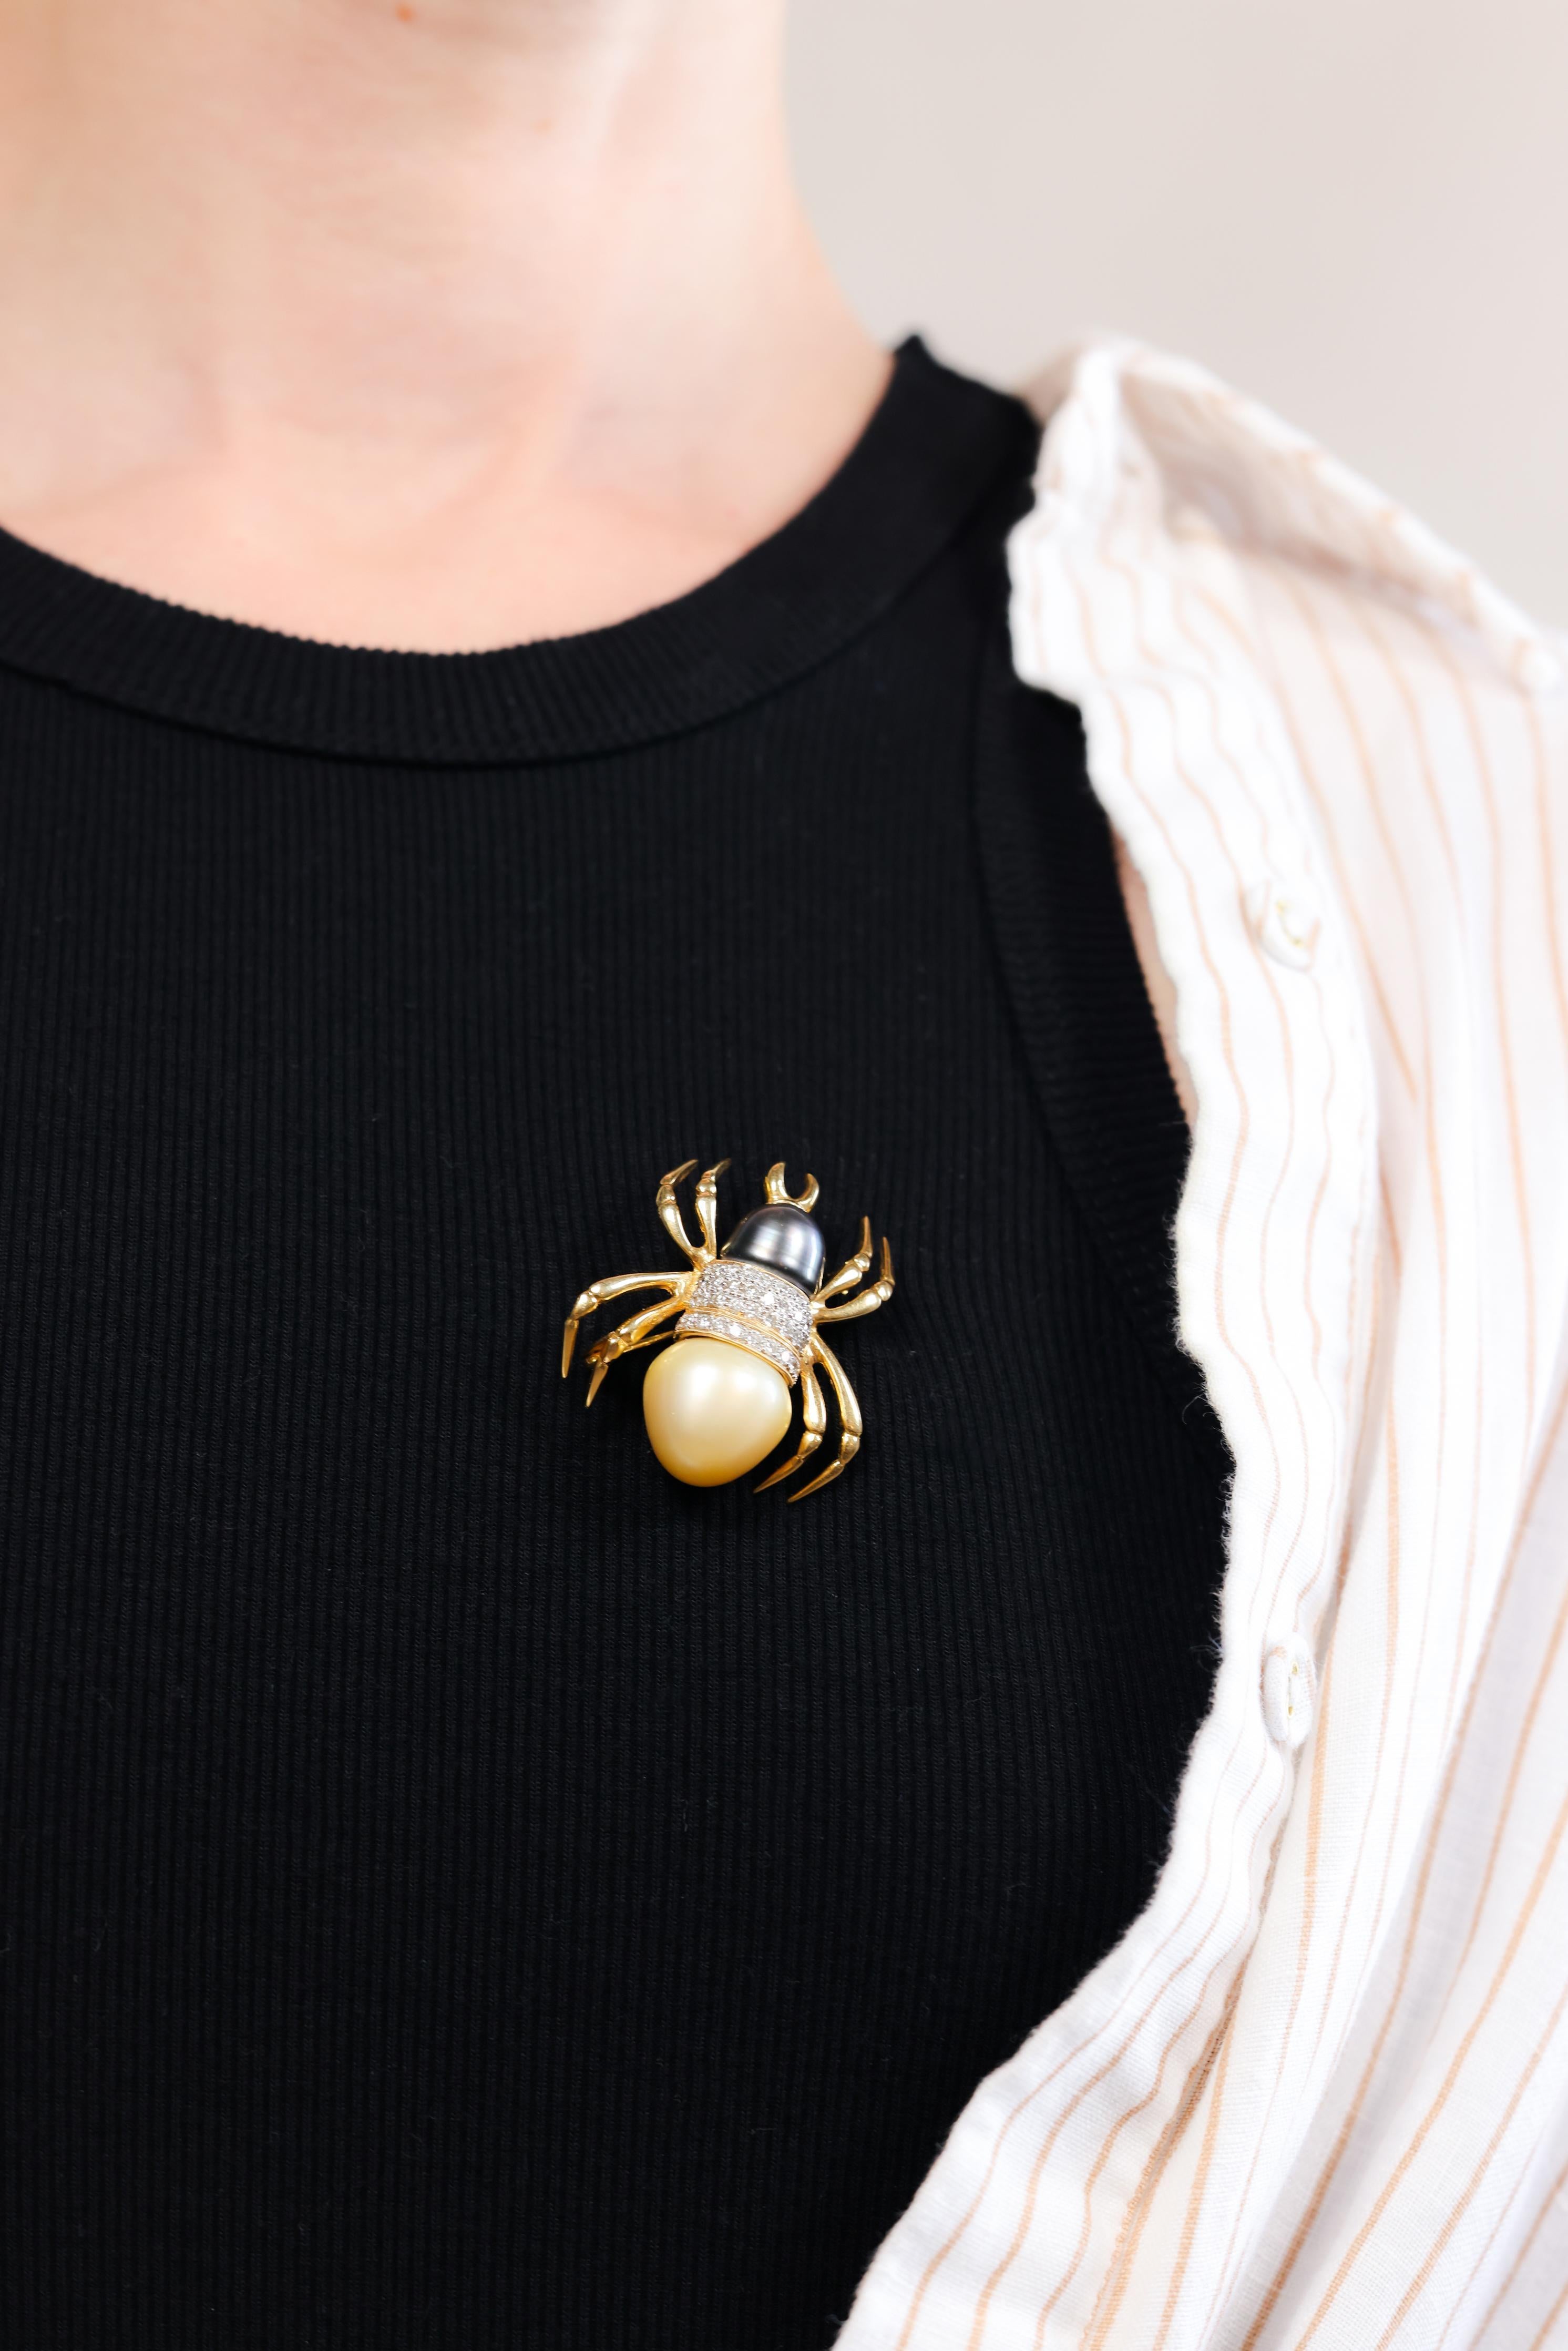 One Vintage Pearl Diamond 18k Yellow Gold Spider Brooch. Featuring one golden Tahitian pearl measuring approximately 17.00 millimeters and one Tahitian black pearl measuring approximately 12.60 millimeters. Accented by 40 round brilliant cut